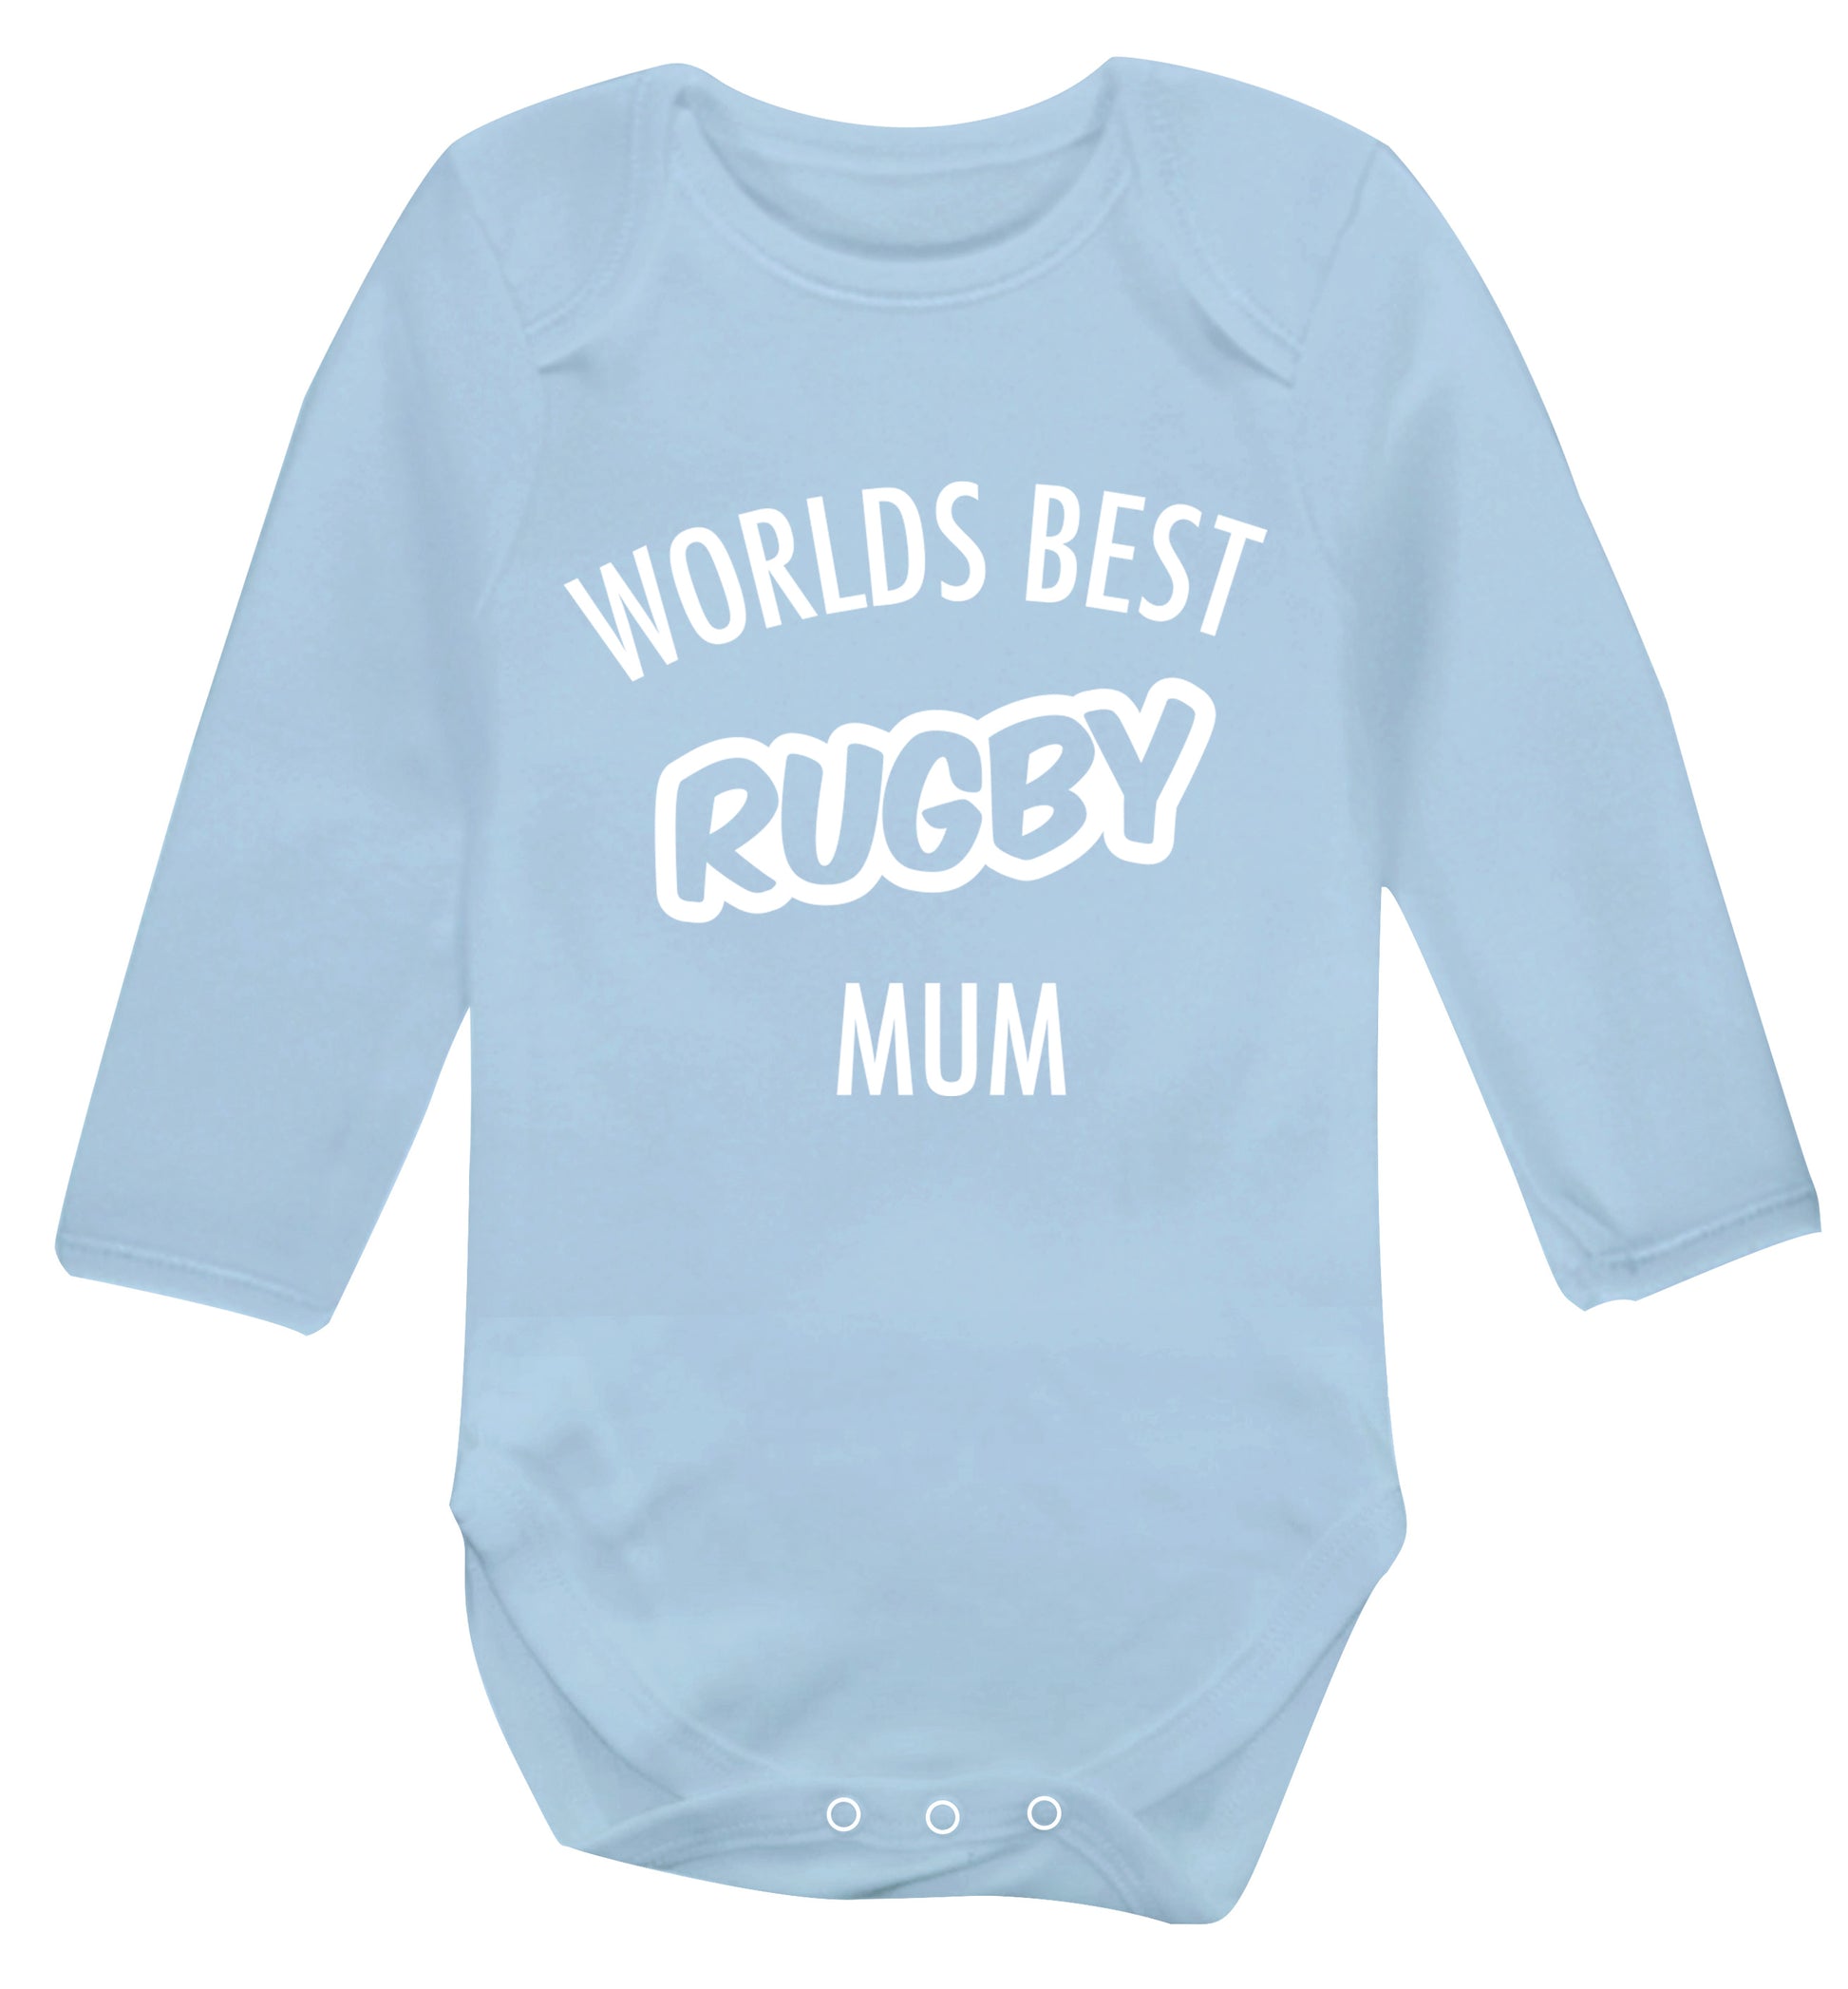 Worlds best rugby mum Baby Vest long sleeved pale blue 6-12 months